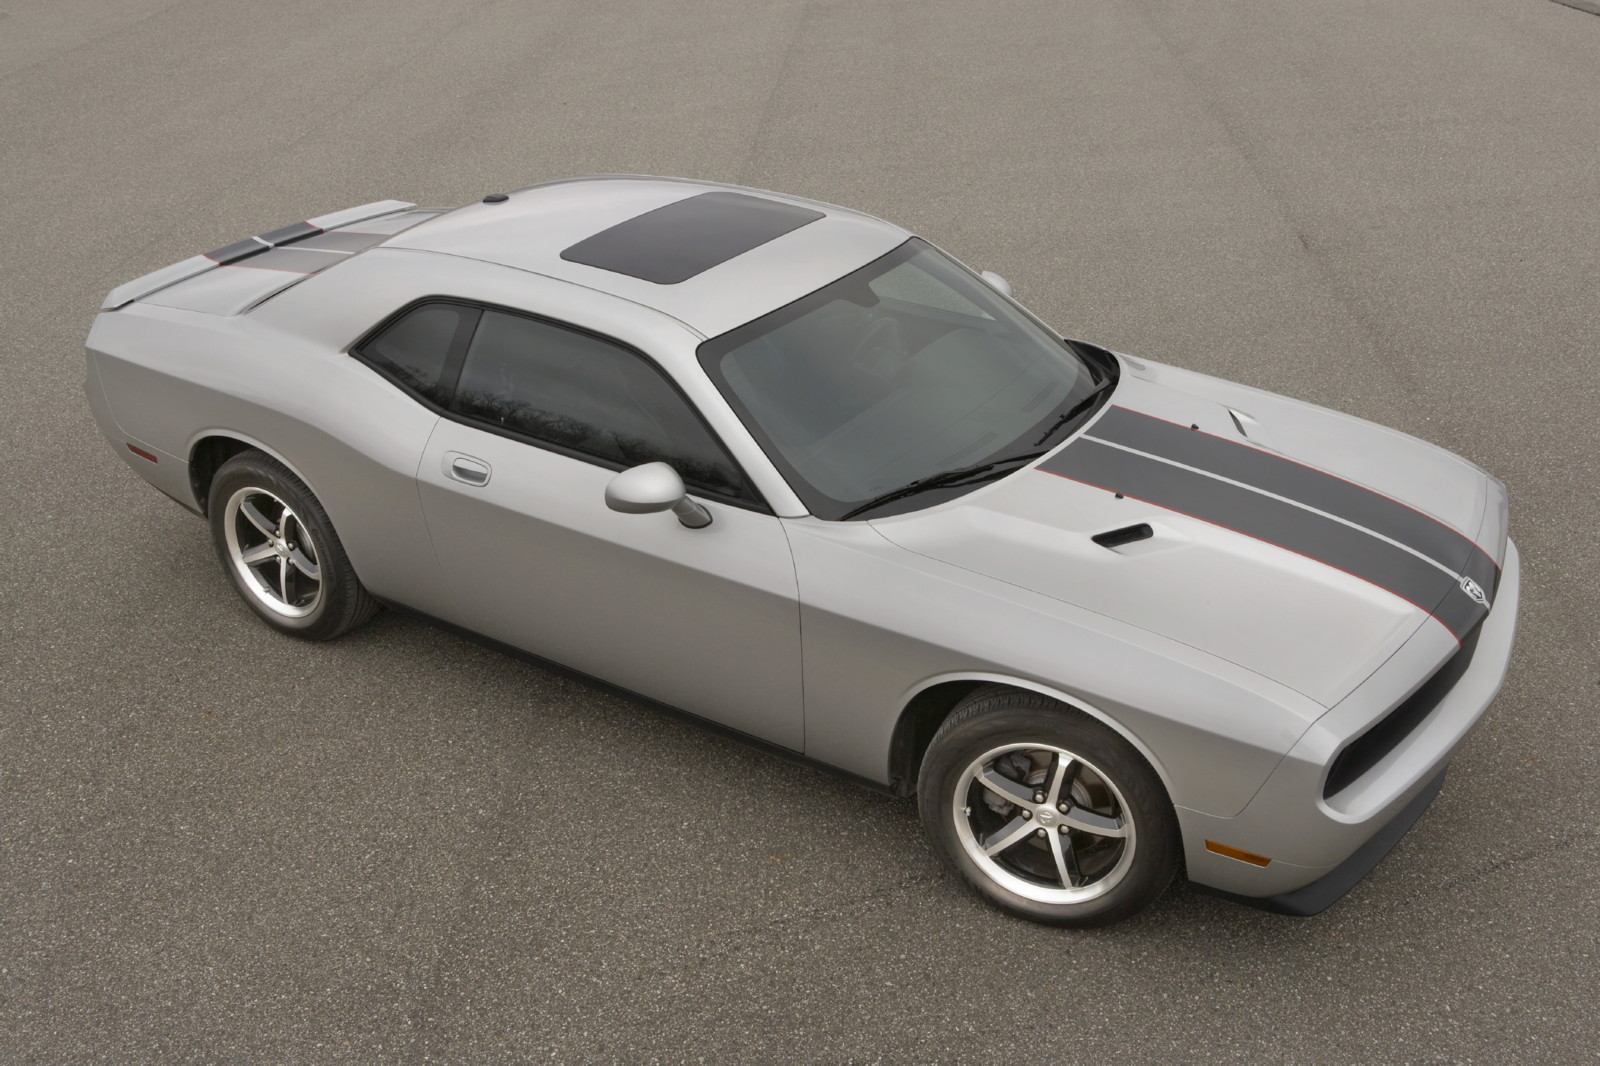 2010 Dodge Challenger prices and expert review - The Car Connection